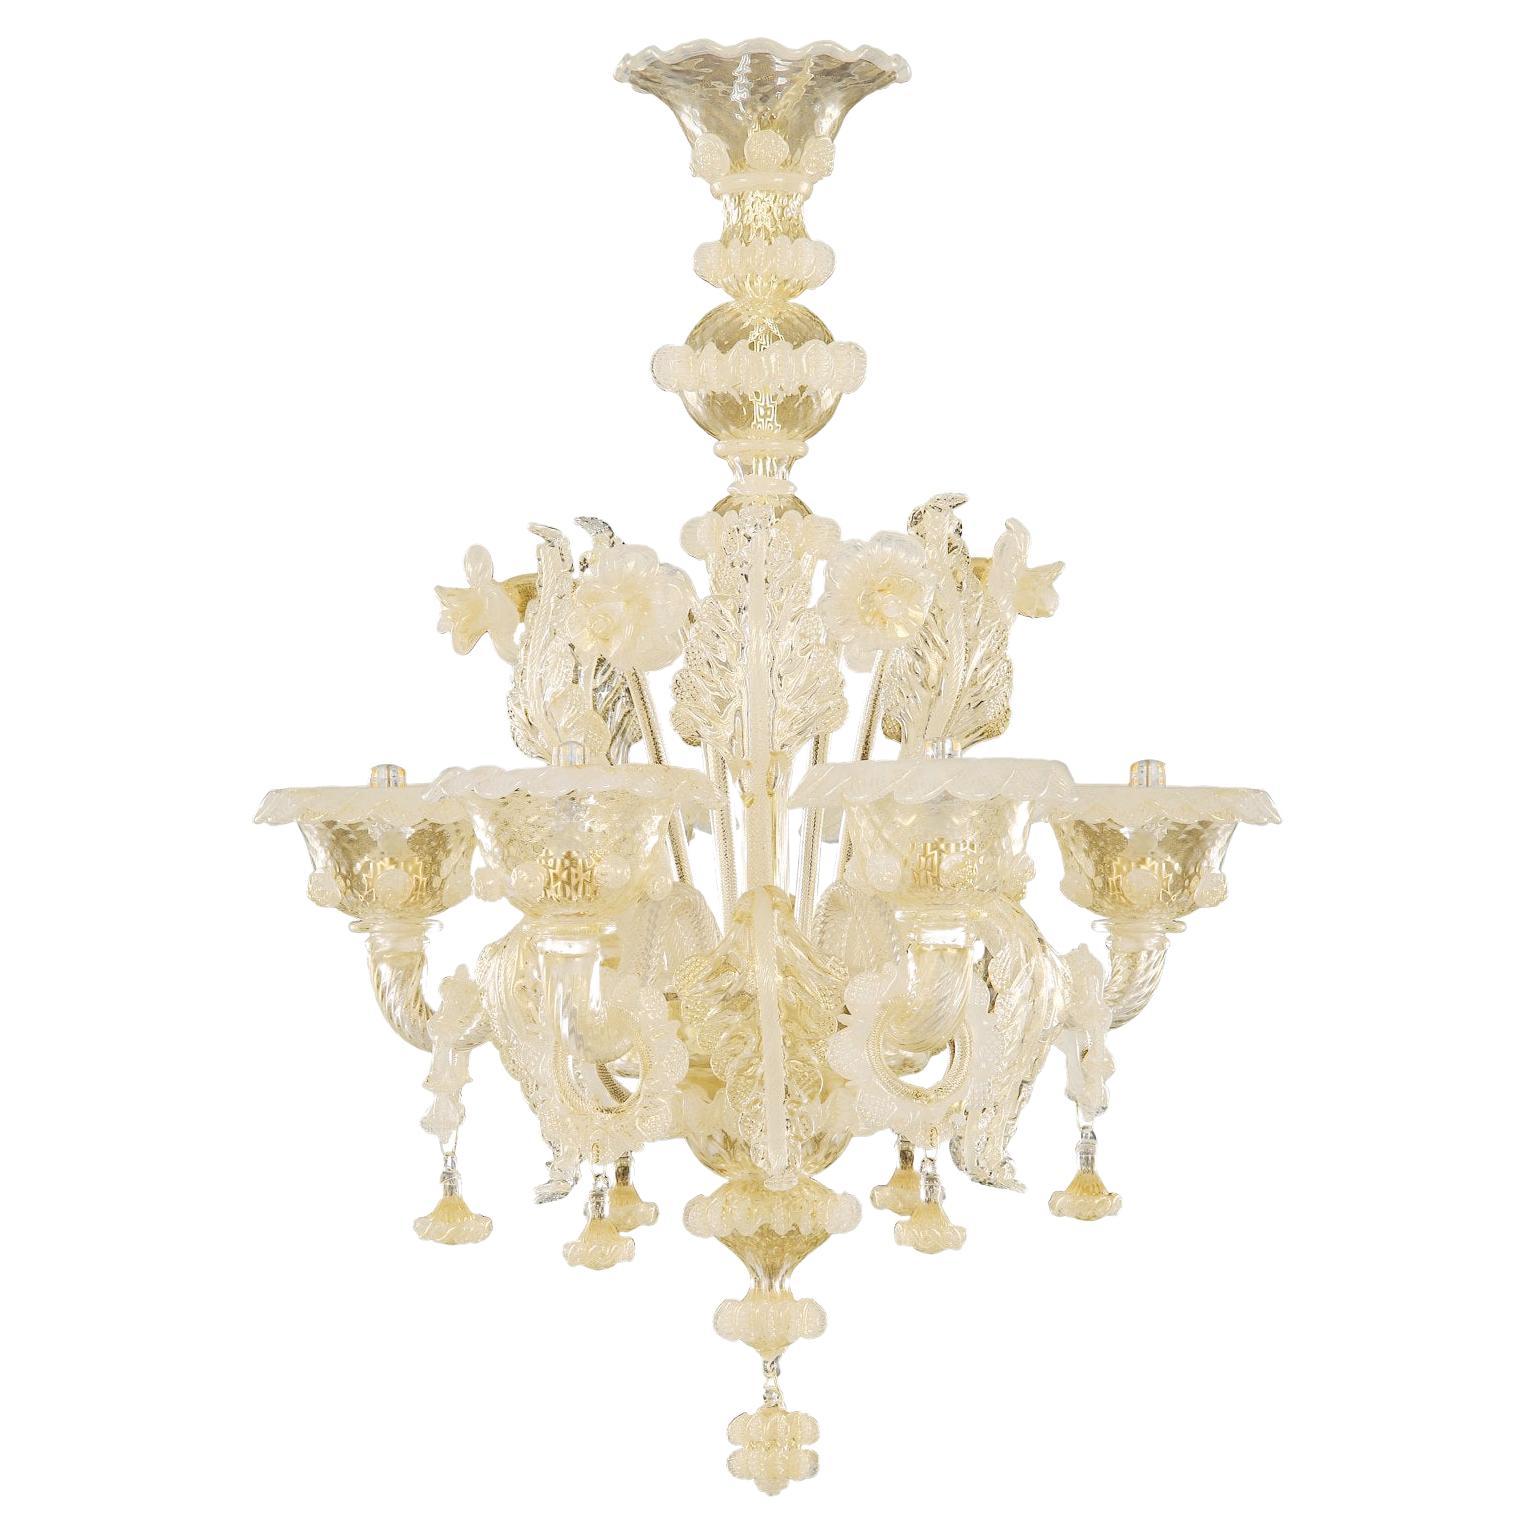 Artistic Rich Chandelier, 6 Arms Gold Murano Glass silk details by Multiforme